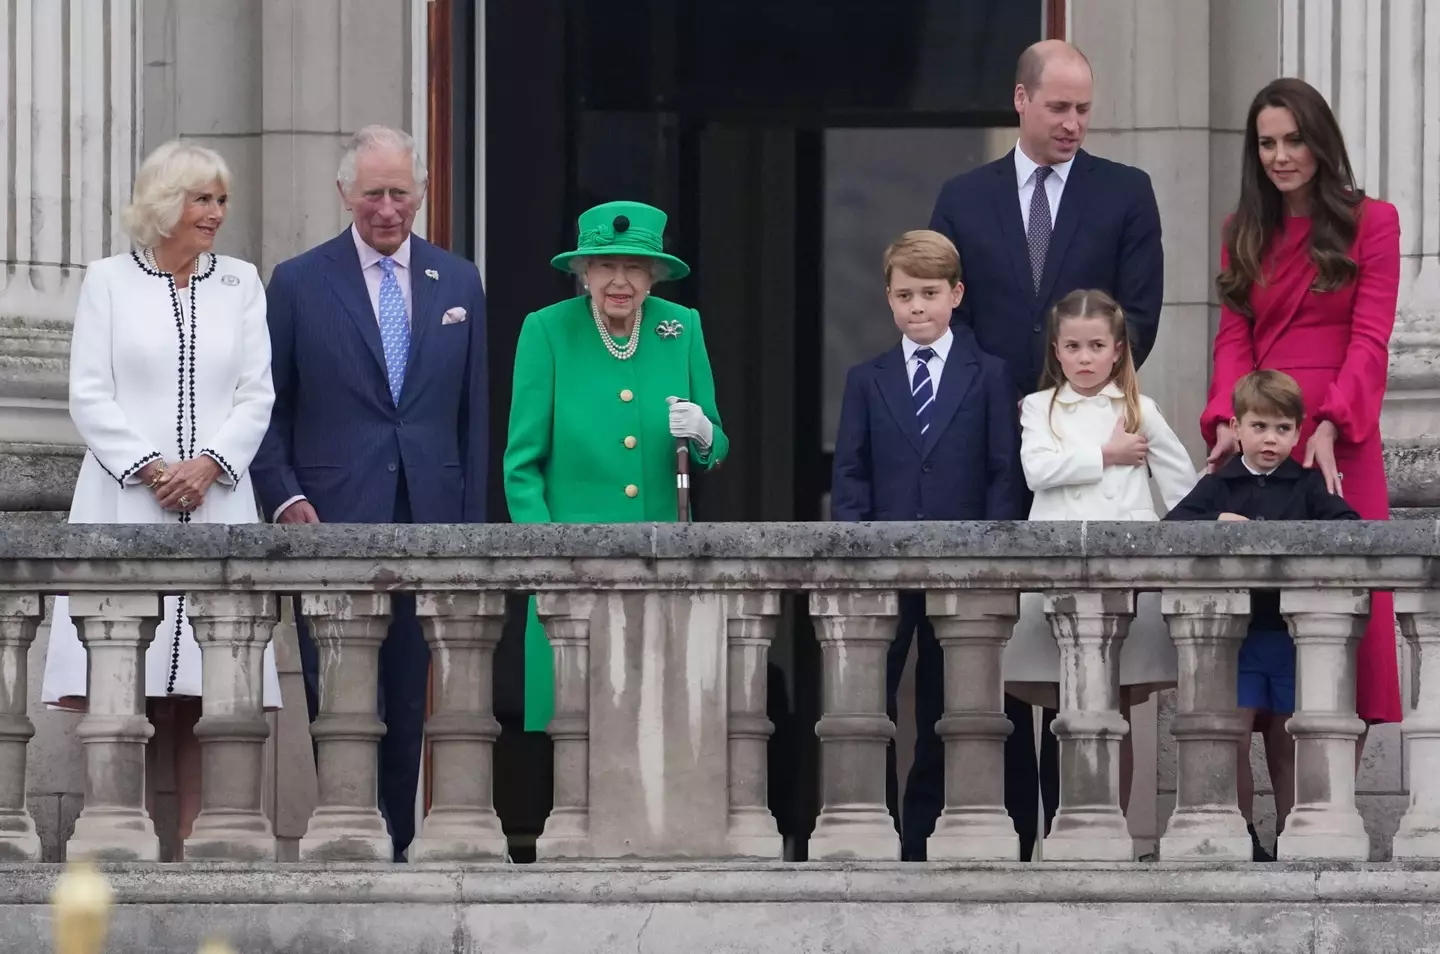 The Queen and the rest of the family at Buckingham Palace on Sunday. Image: Alamy